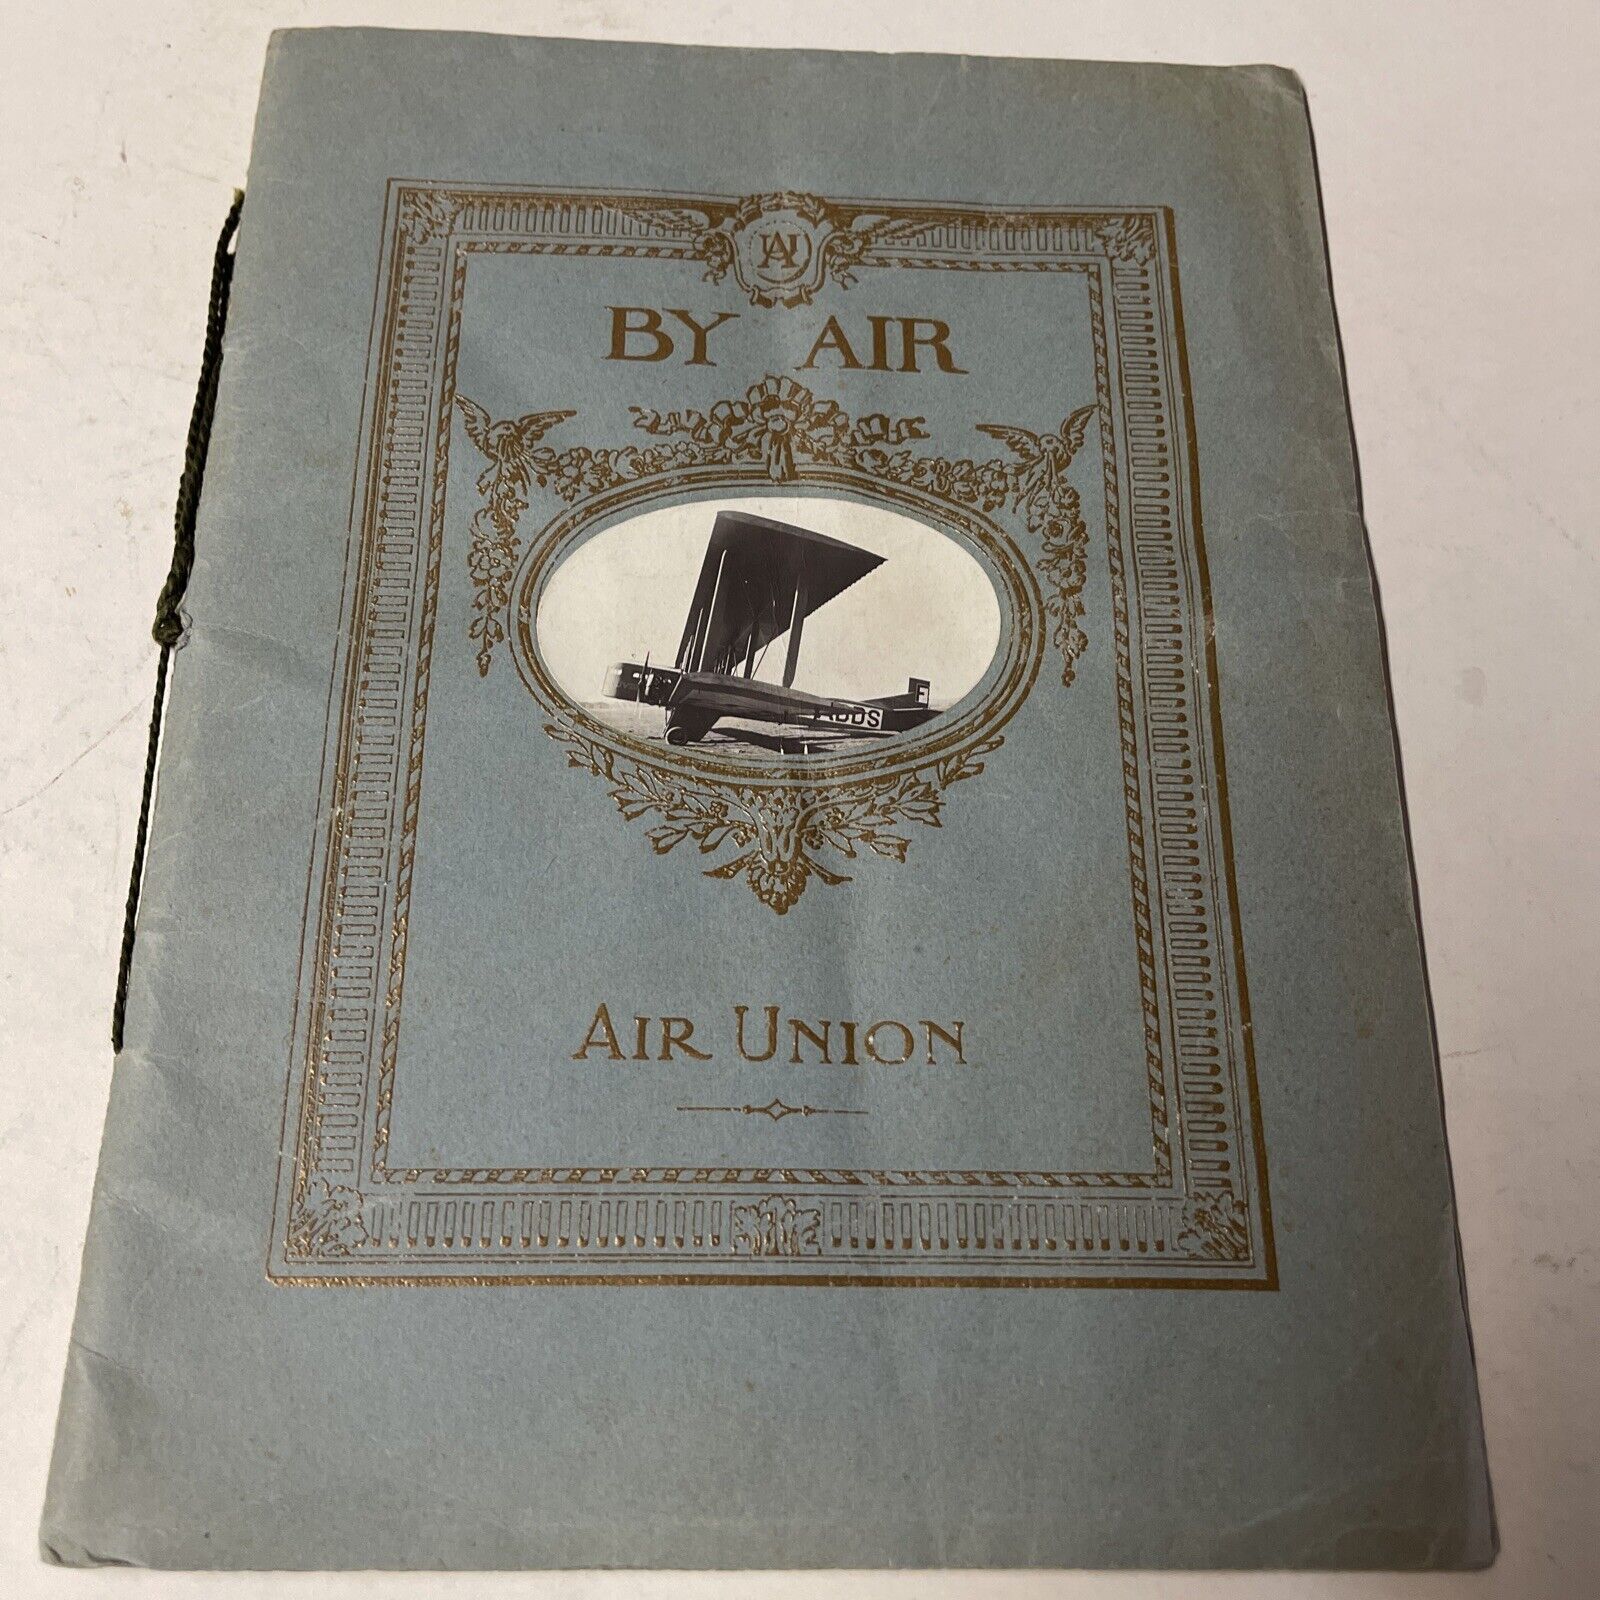 1924 Air Union By Air AIRLINE TIMETABLE  Brochure Aviation History Book